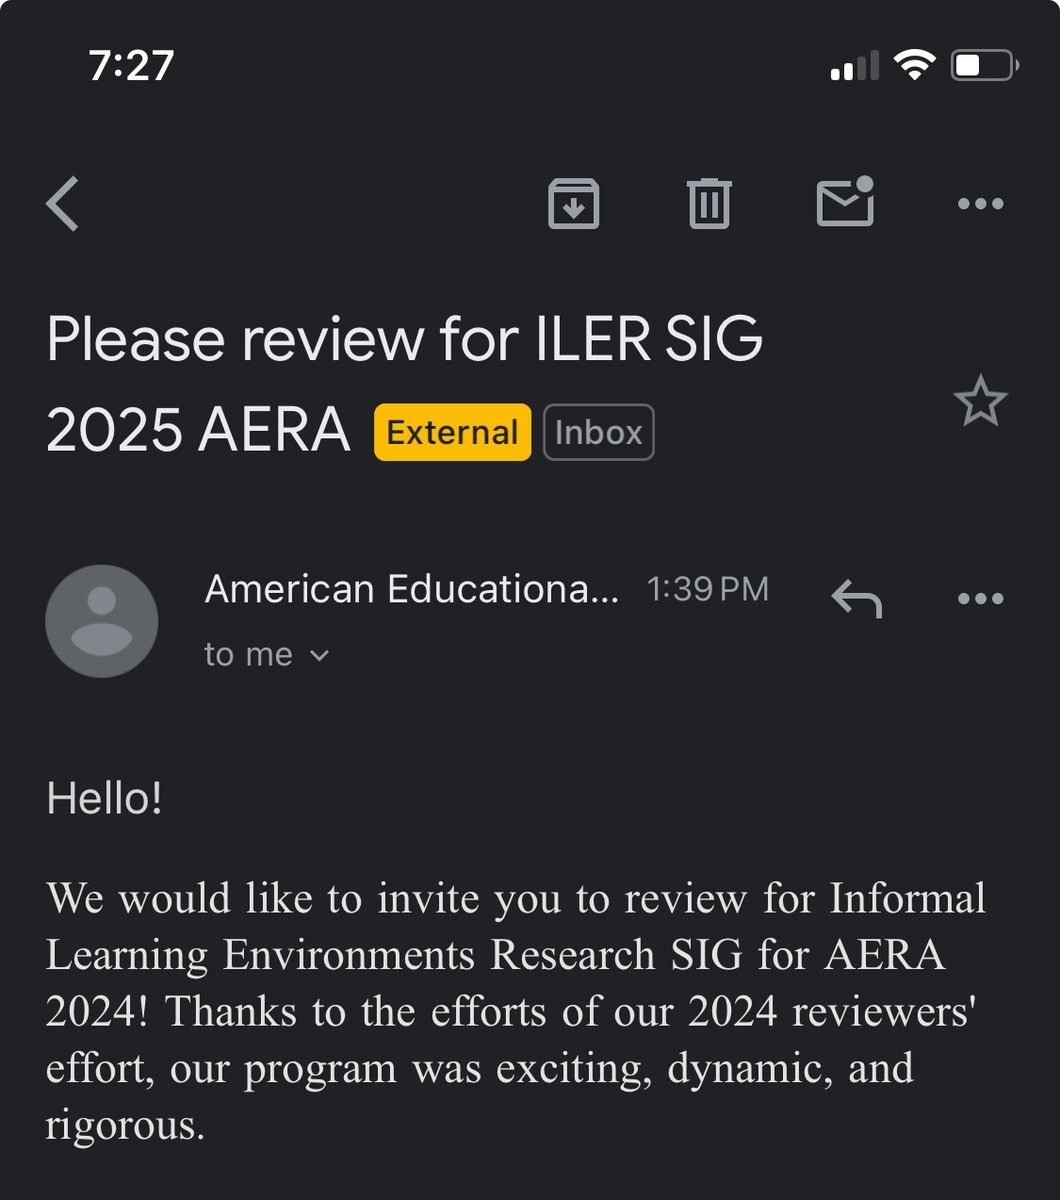 Honored to review for the AERA Annual Meeting for the fourth year! This year, I'm also evaluating submissions for SIGs like Informal Learning Environments and Computer & Internet Application in Education. Proud to support advances in #EducationResearch #AERA2024